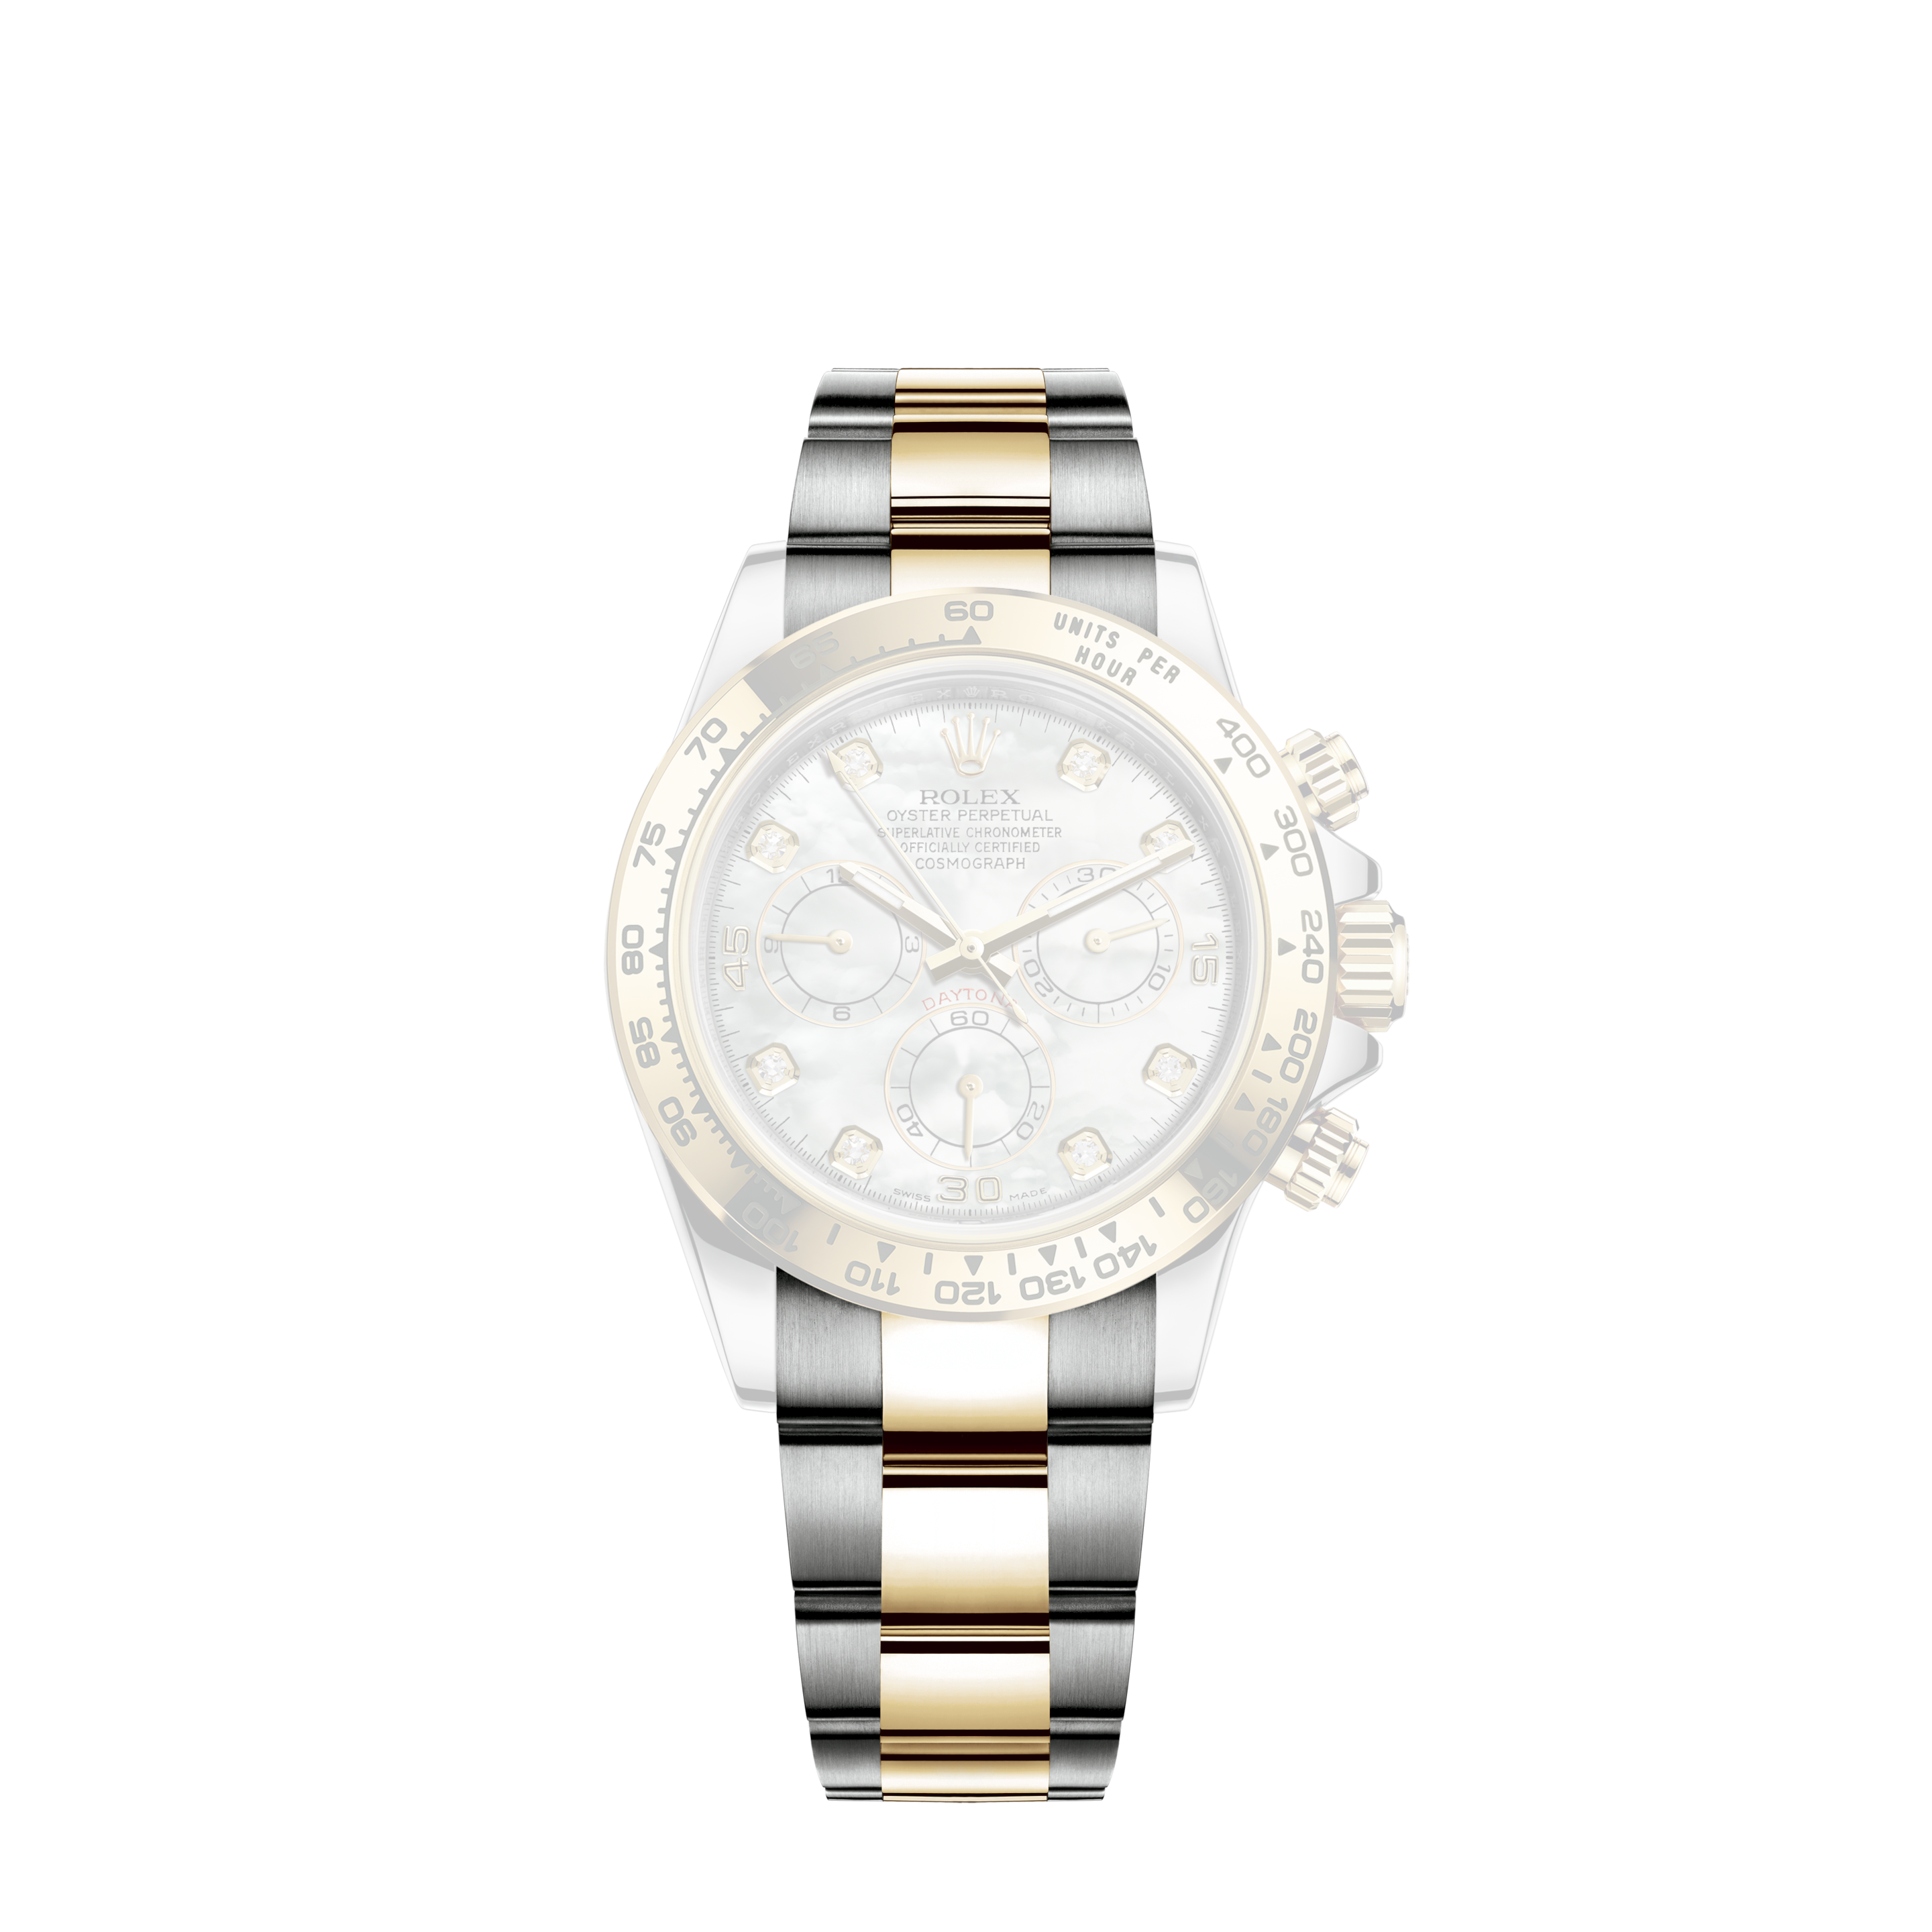 Rolex 126200 Datejust 36mm Stainless Steel Domed Smooth Bezel White Roman Dial Oyster Bracelet